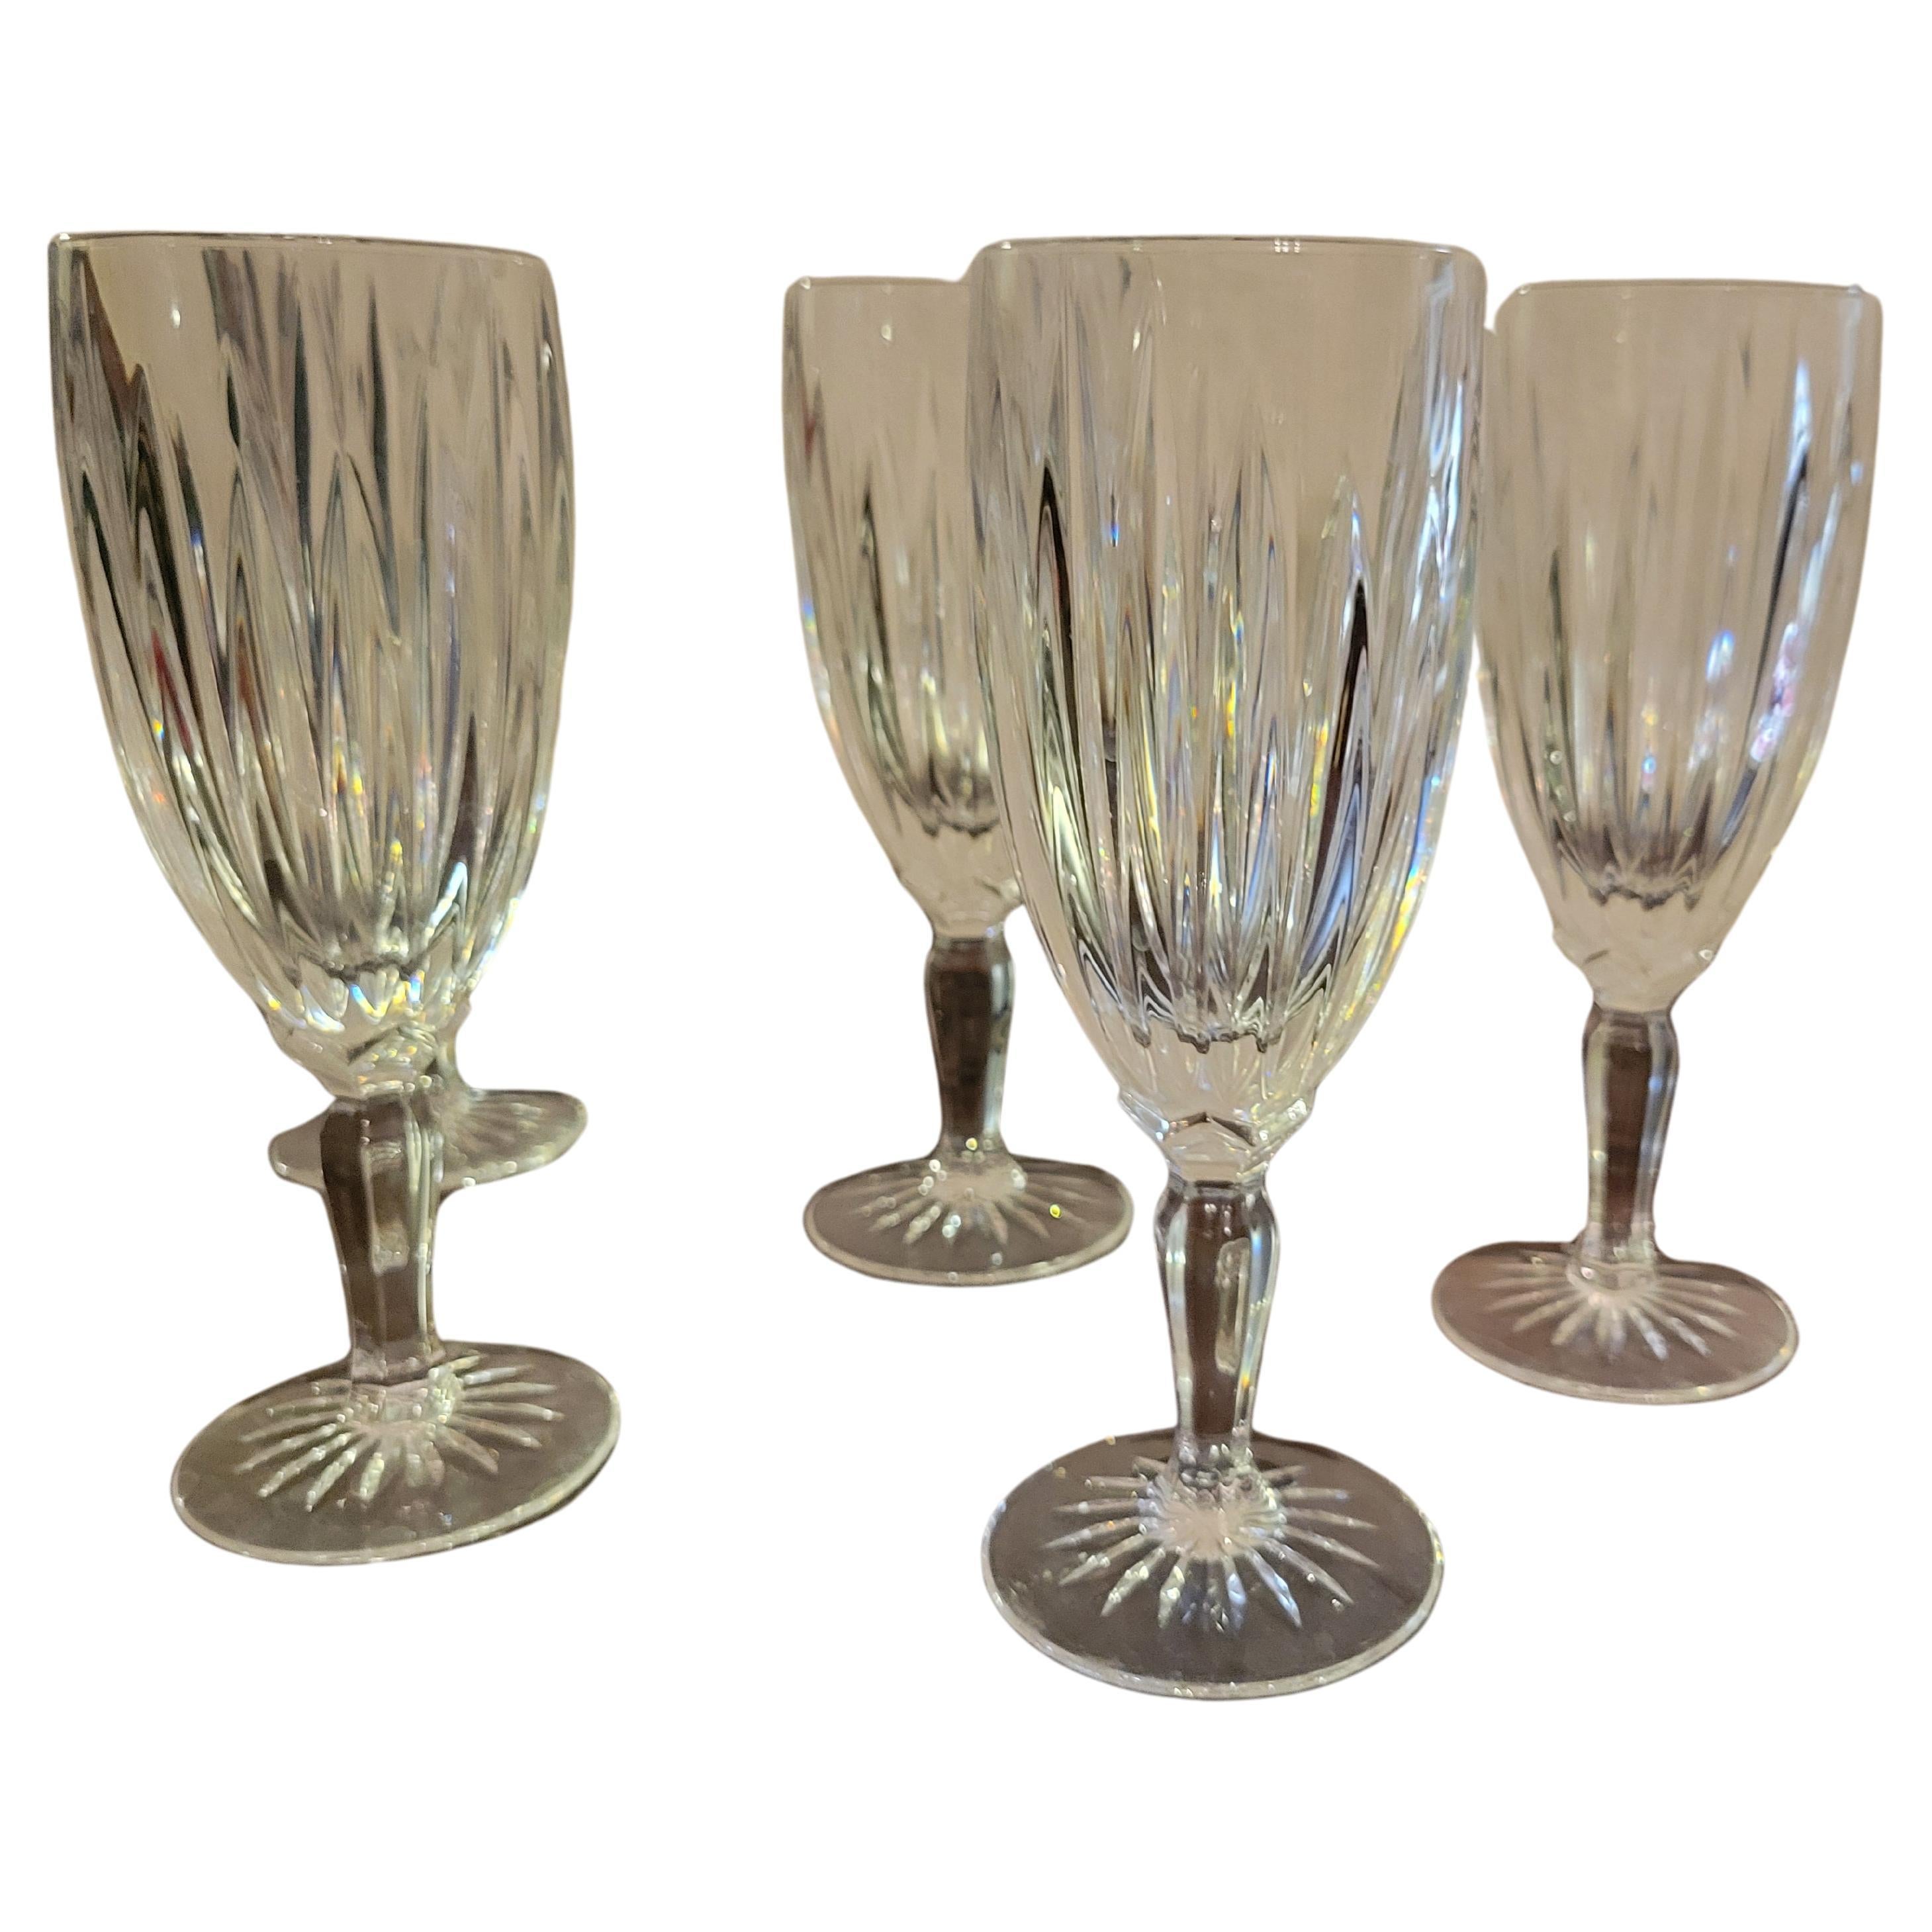 A set of 6 Crystal D'Argus - Durant iced tea goblets. 
The height if each glass is 8 1/2 in and the width is 3